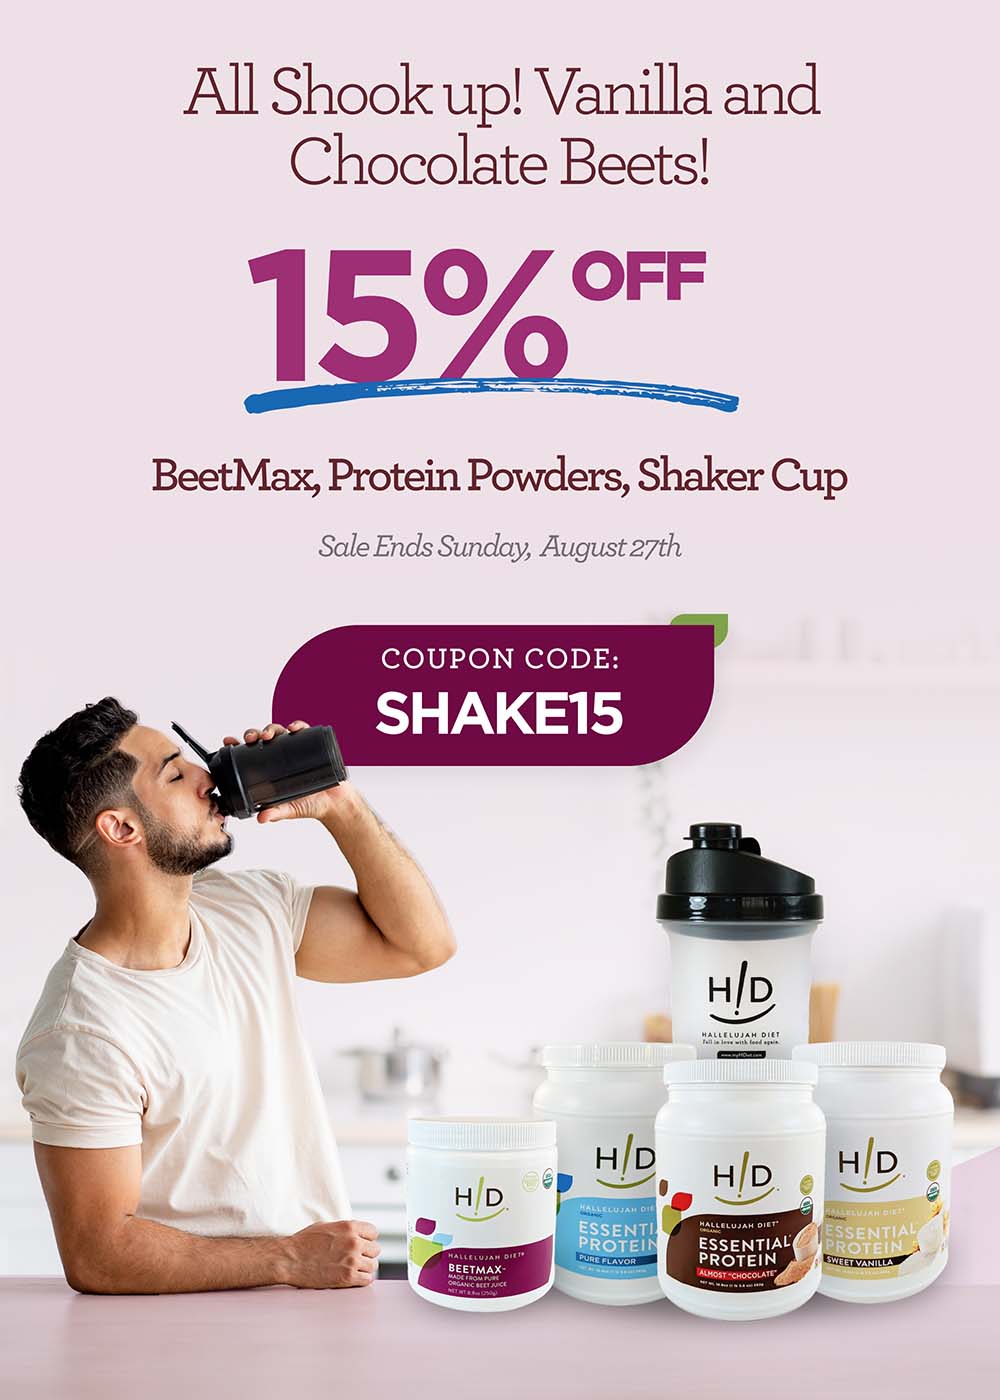 All Shook Up Sale Save on BeetMax, Protein Powders, Shaker Cup